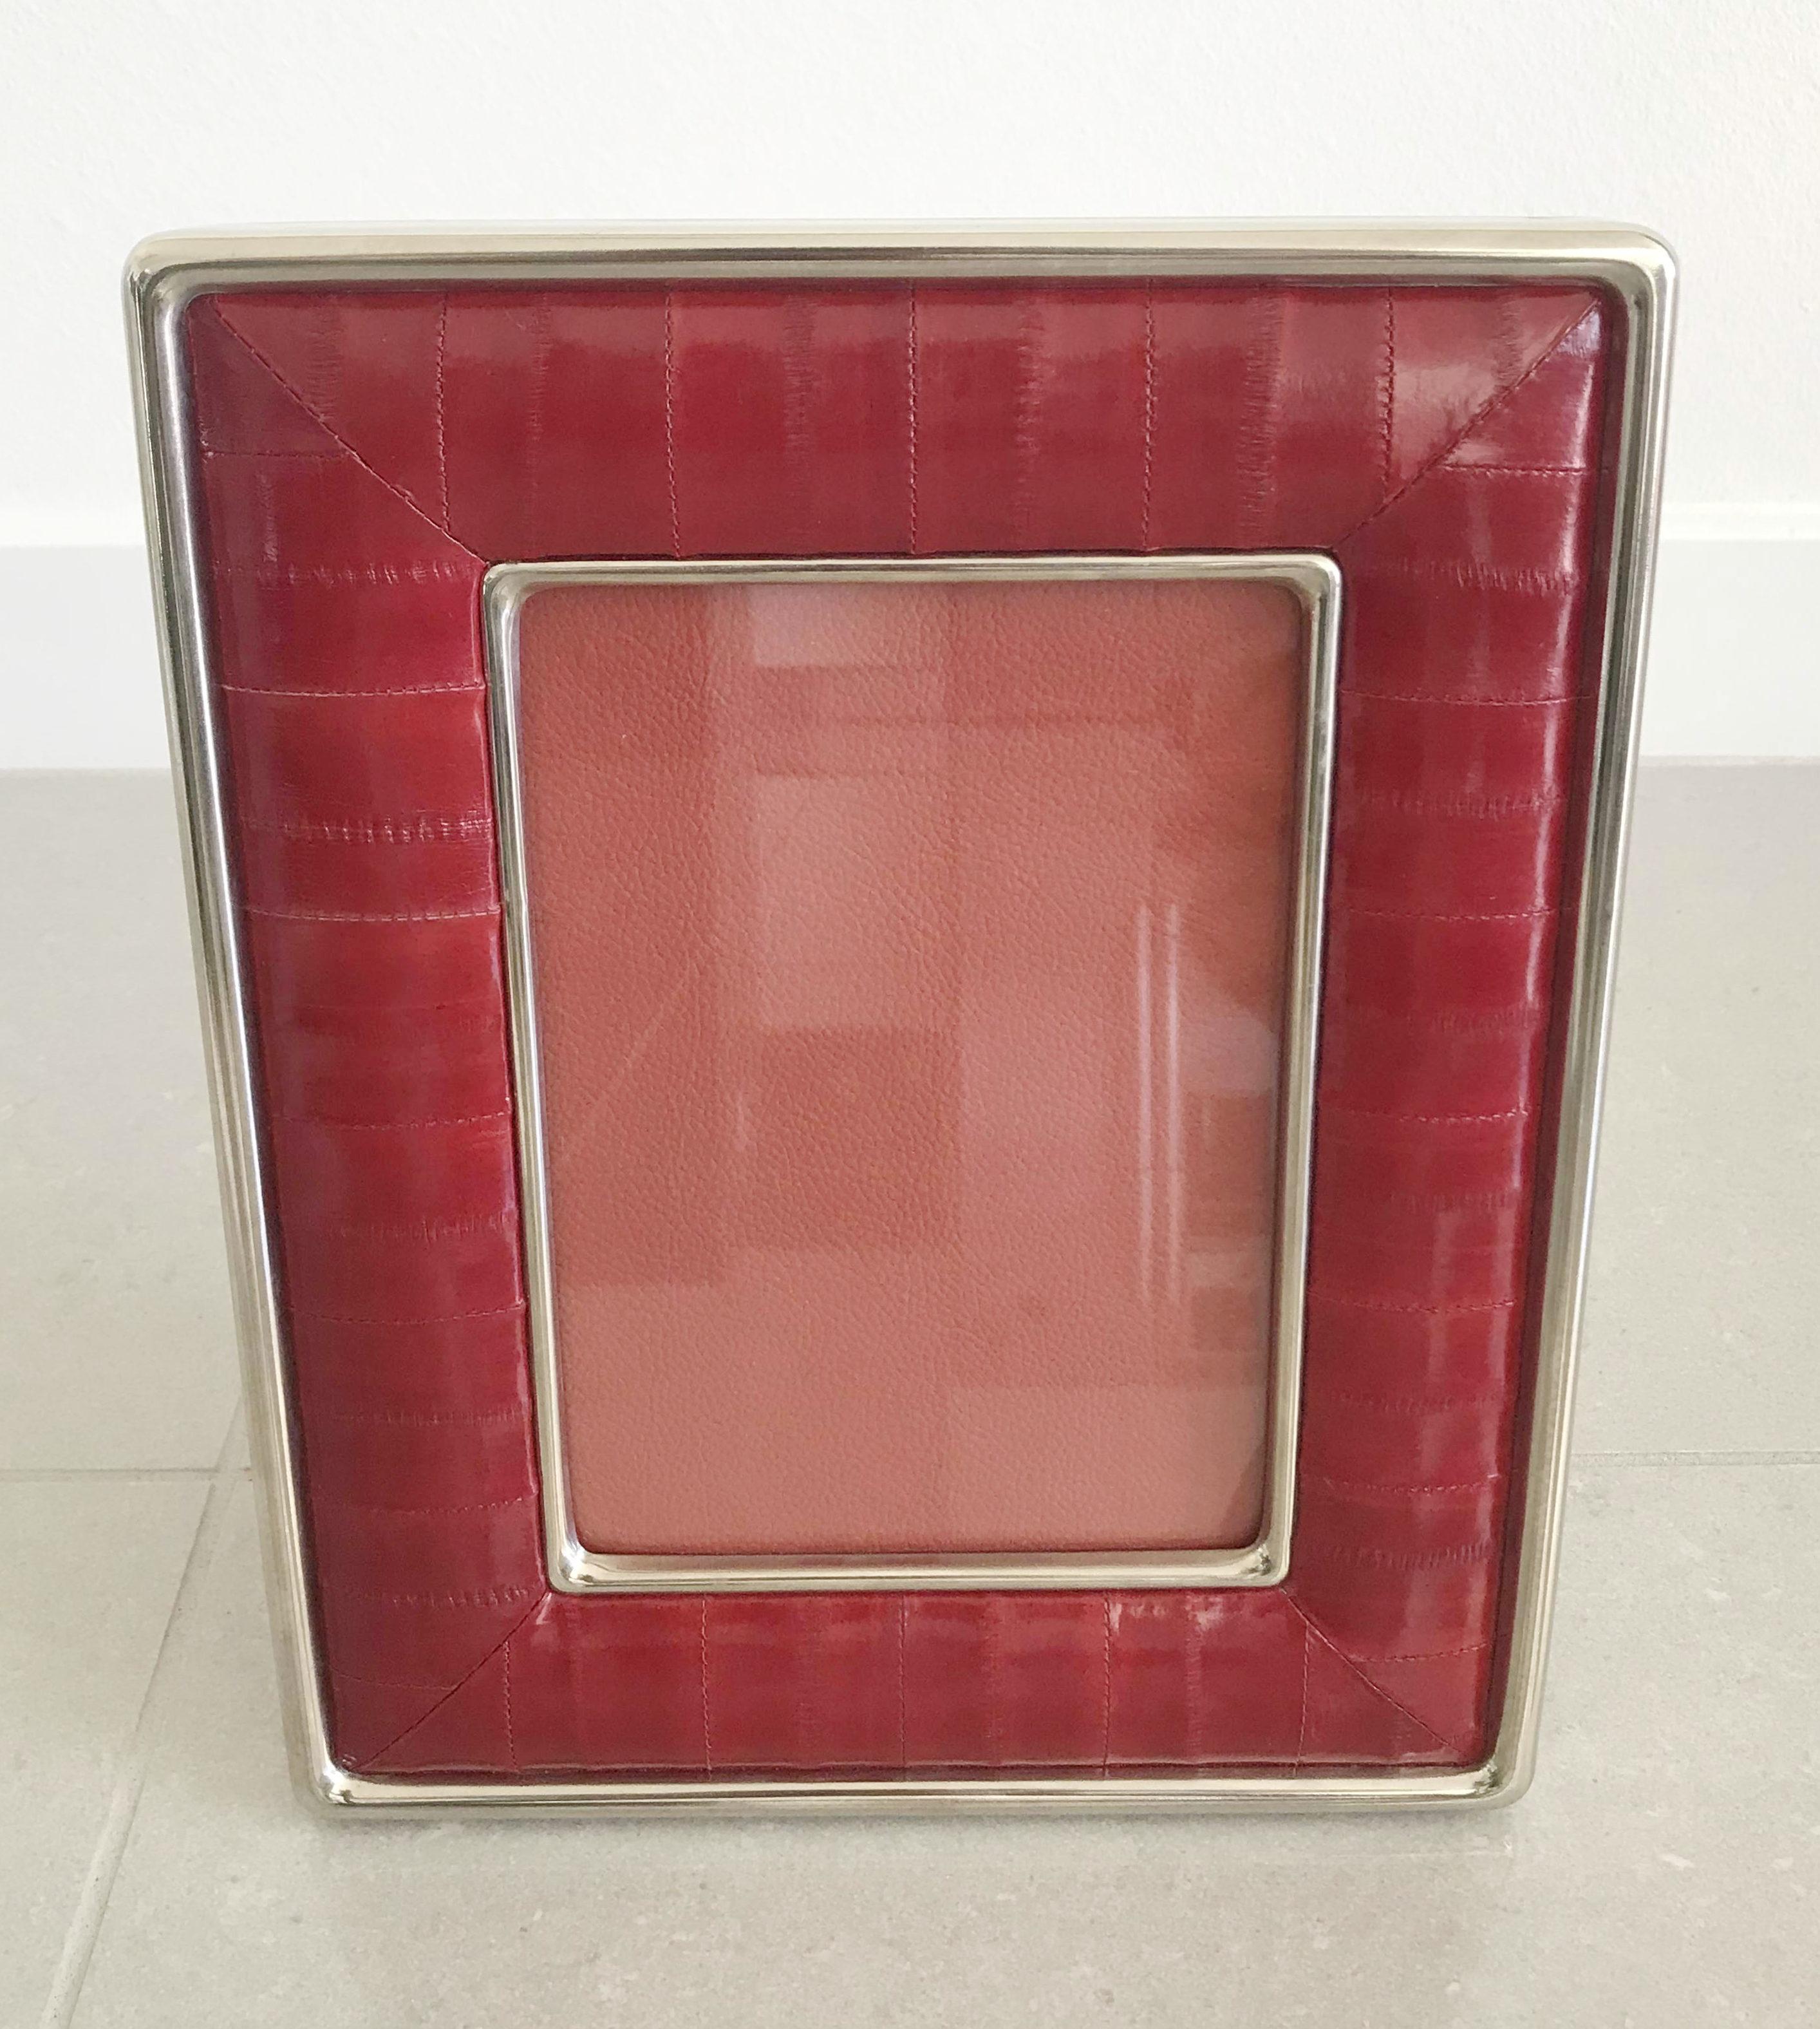 Red eel leather and nickel-plated picture frame by Fabio Ltd
Measures: Height 10.5 inches / width 8.5 inches / depth 1 inch
Photo size: 5 inches by 7 inches
LAST 1 in stock in Palm Springs ON 50% OFF SALE for $675 !!!
Order Reference #: FABIOLTD